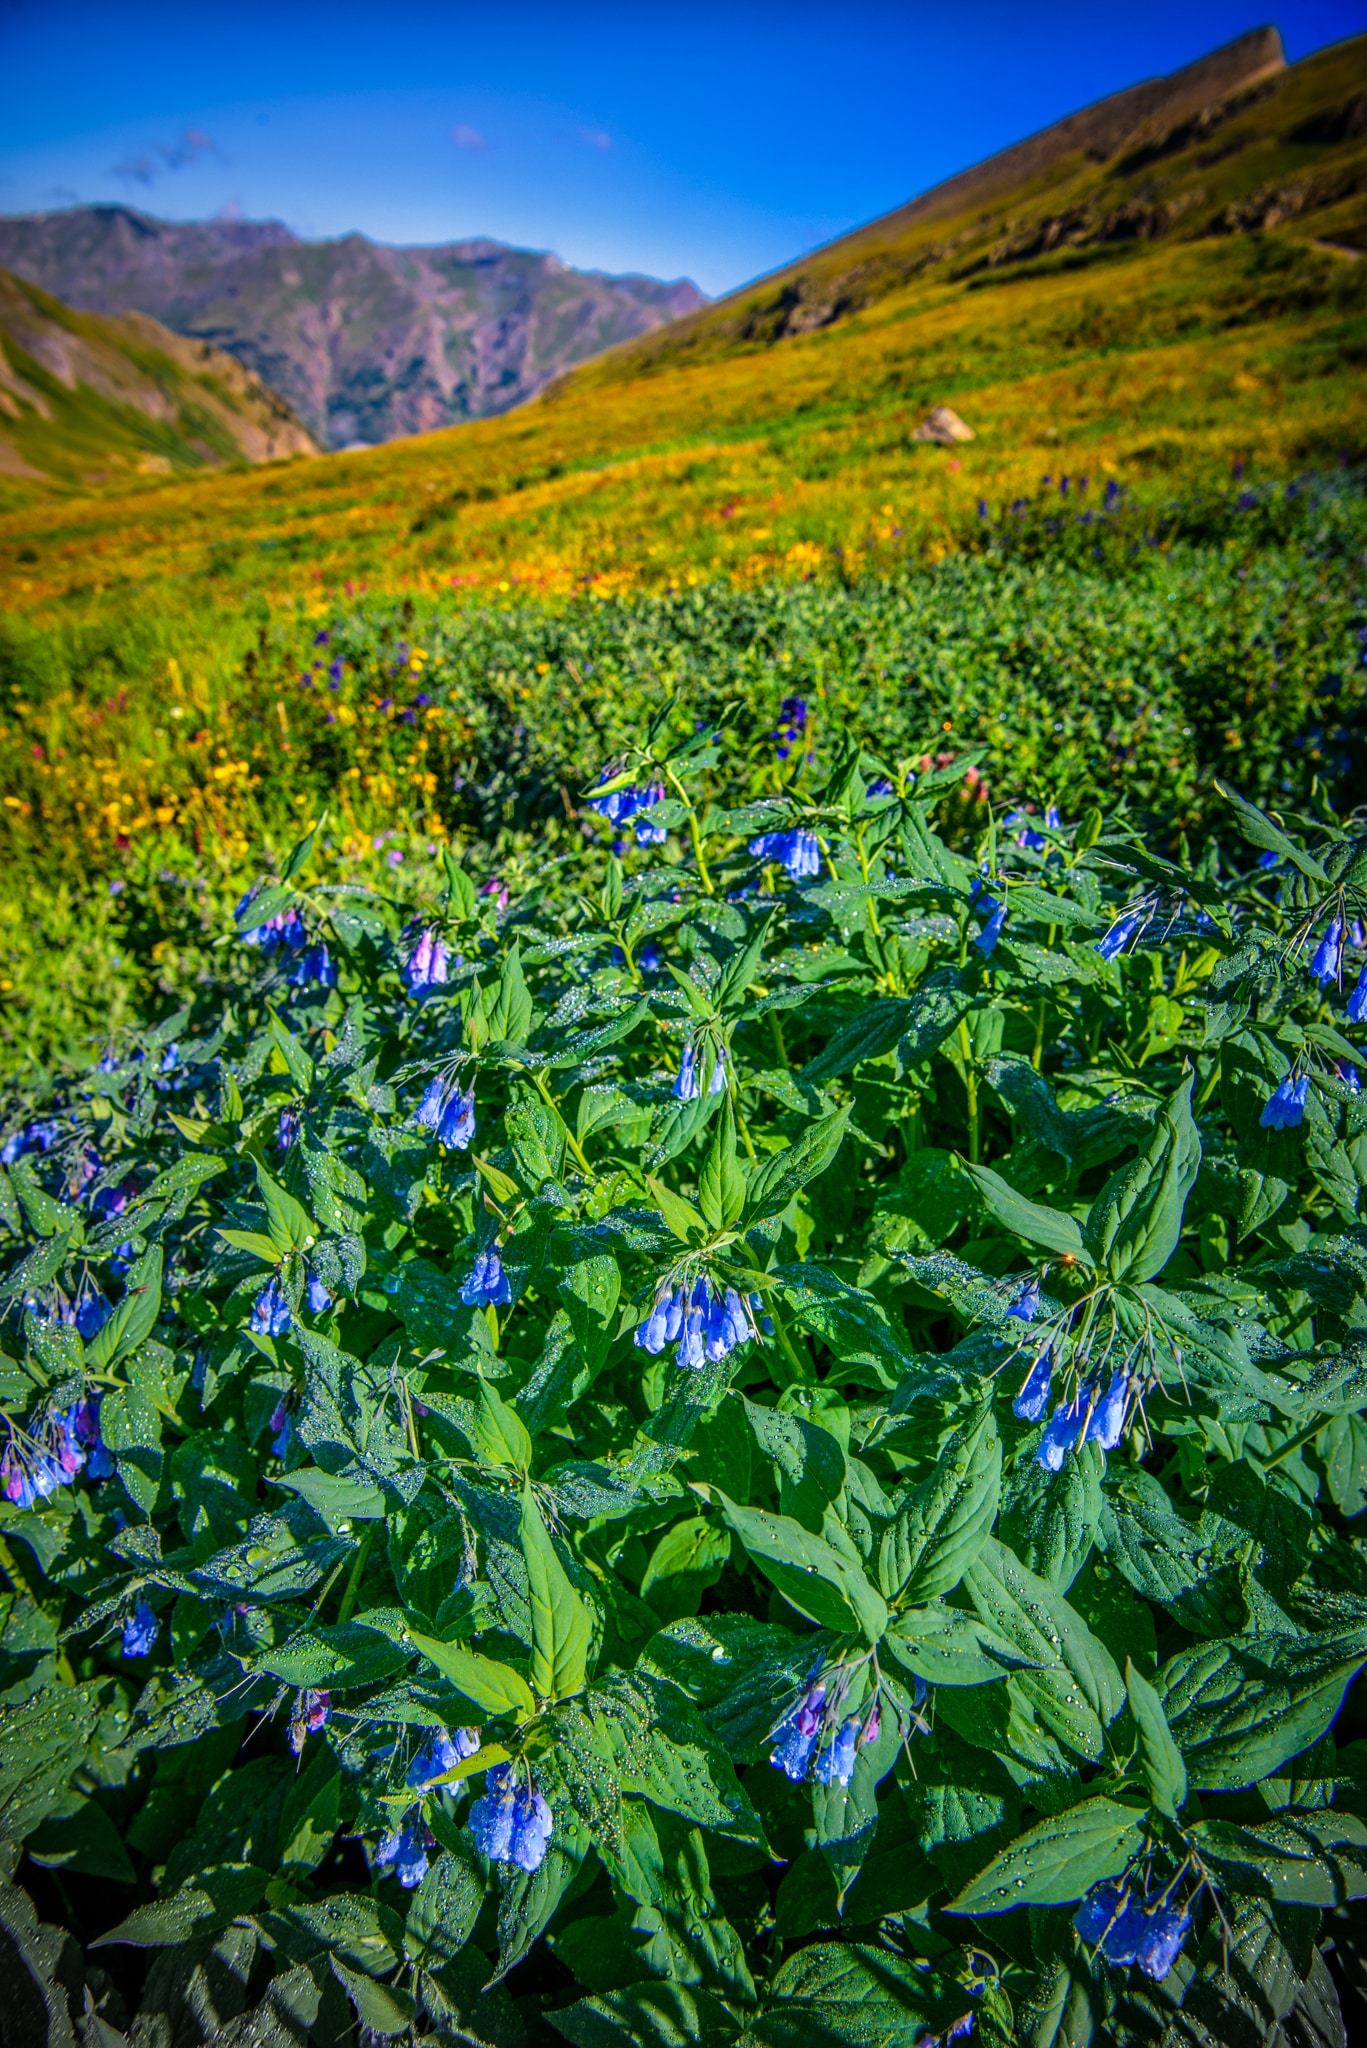 Alpine Mertensia looks very much like Fransican Bluebells; however, this variety grows above tree line. This large patch was found along Stony Pass Road near Silverton, Colorado.